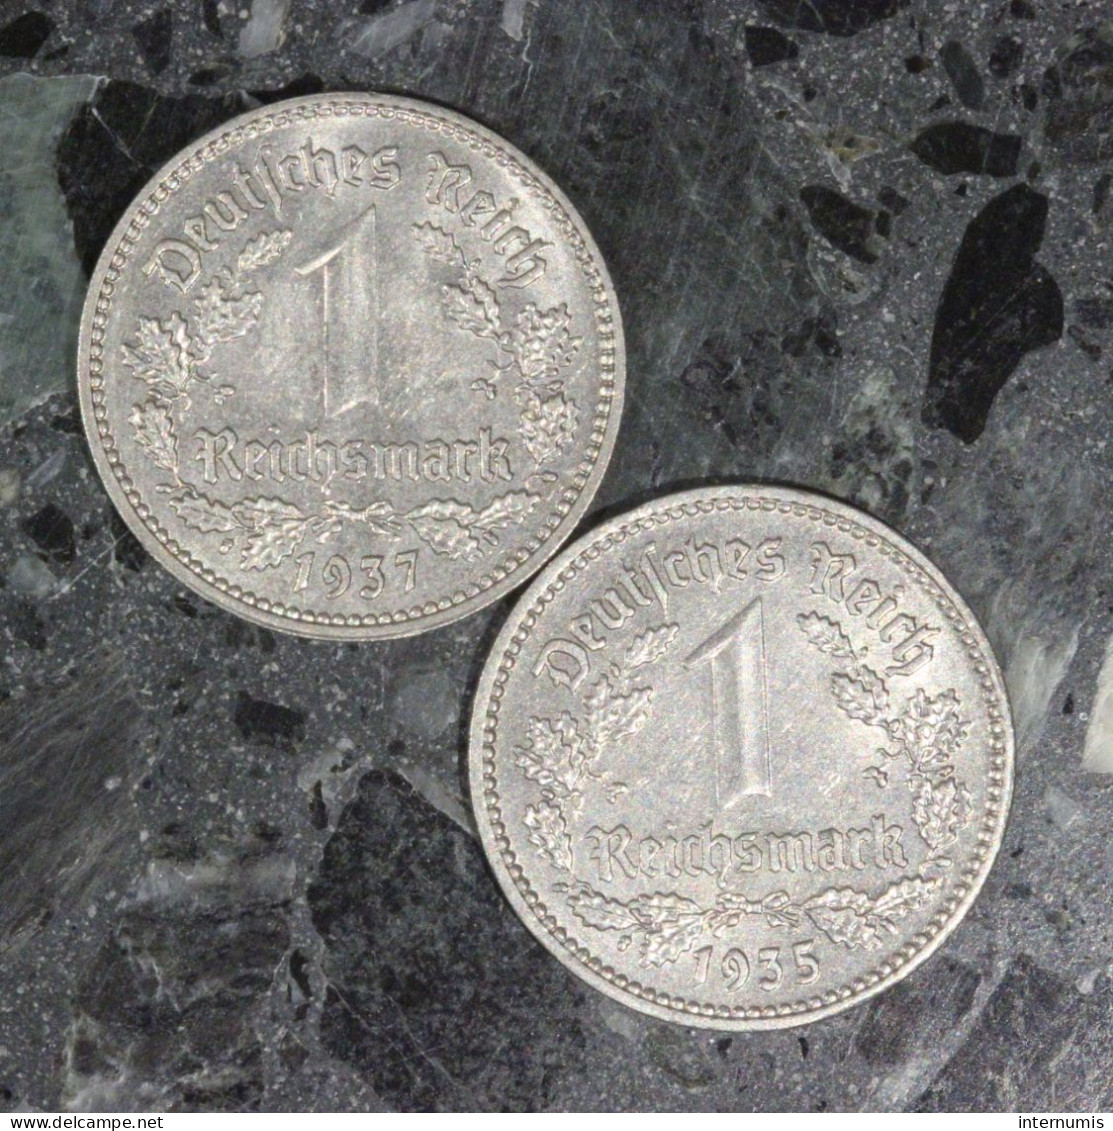 LOT (2) : 1 Mark 1935-A & 1937-A Allemagne / Germany, , 1 Reichsmark, 1935 & 1937, , Nickel, ,
KM# - Vrac - Monnaies